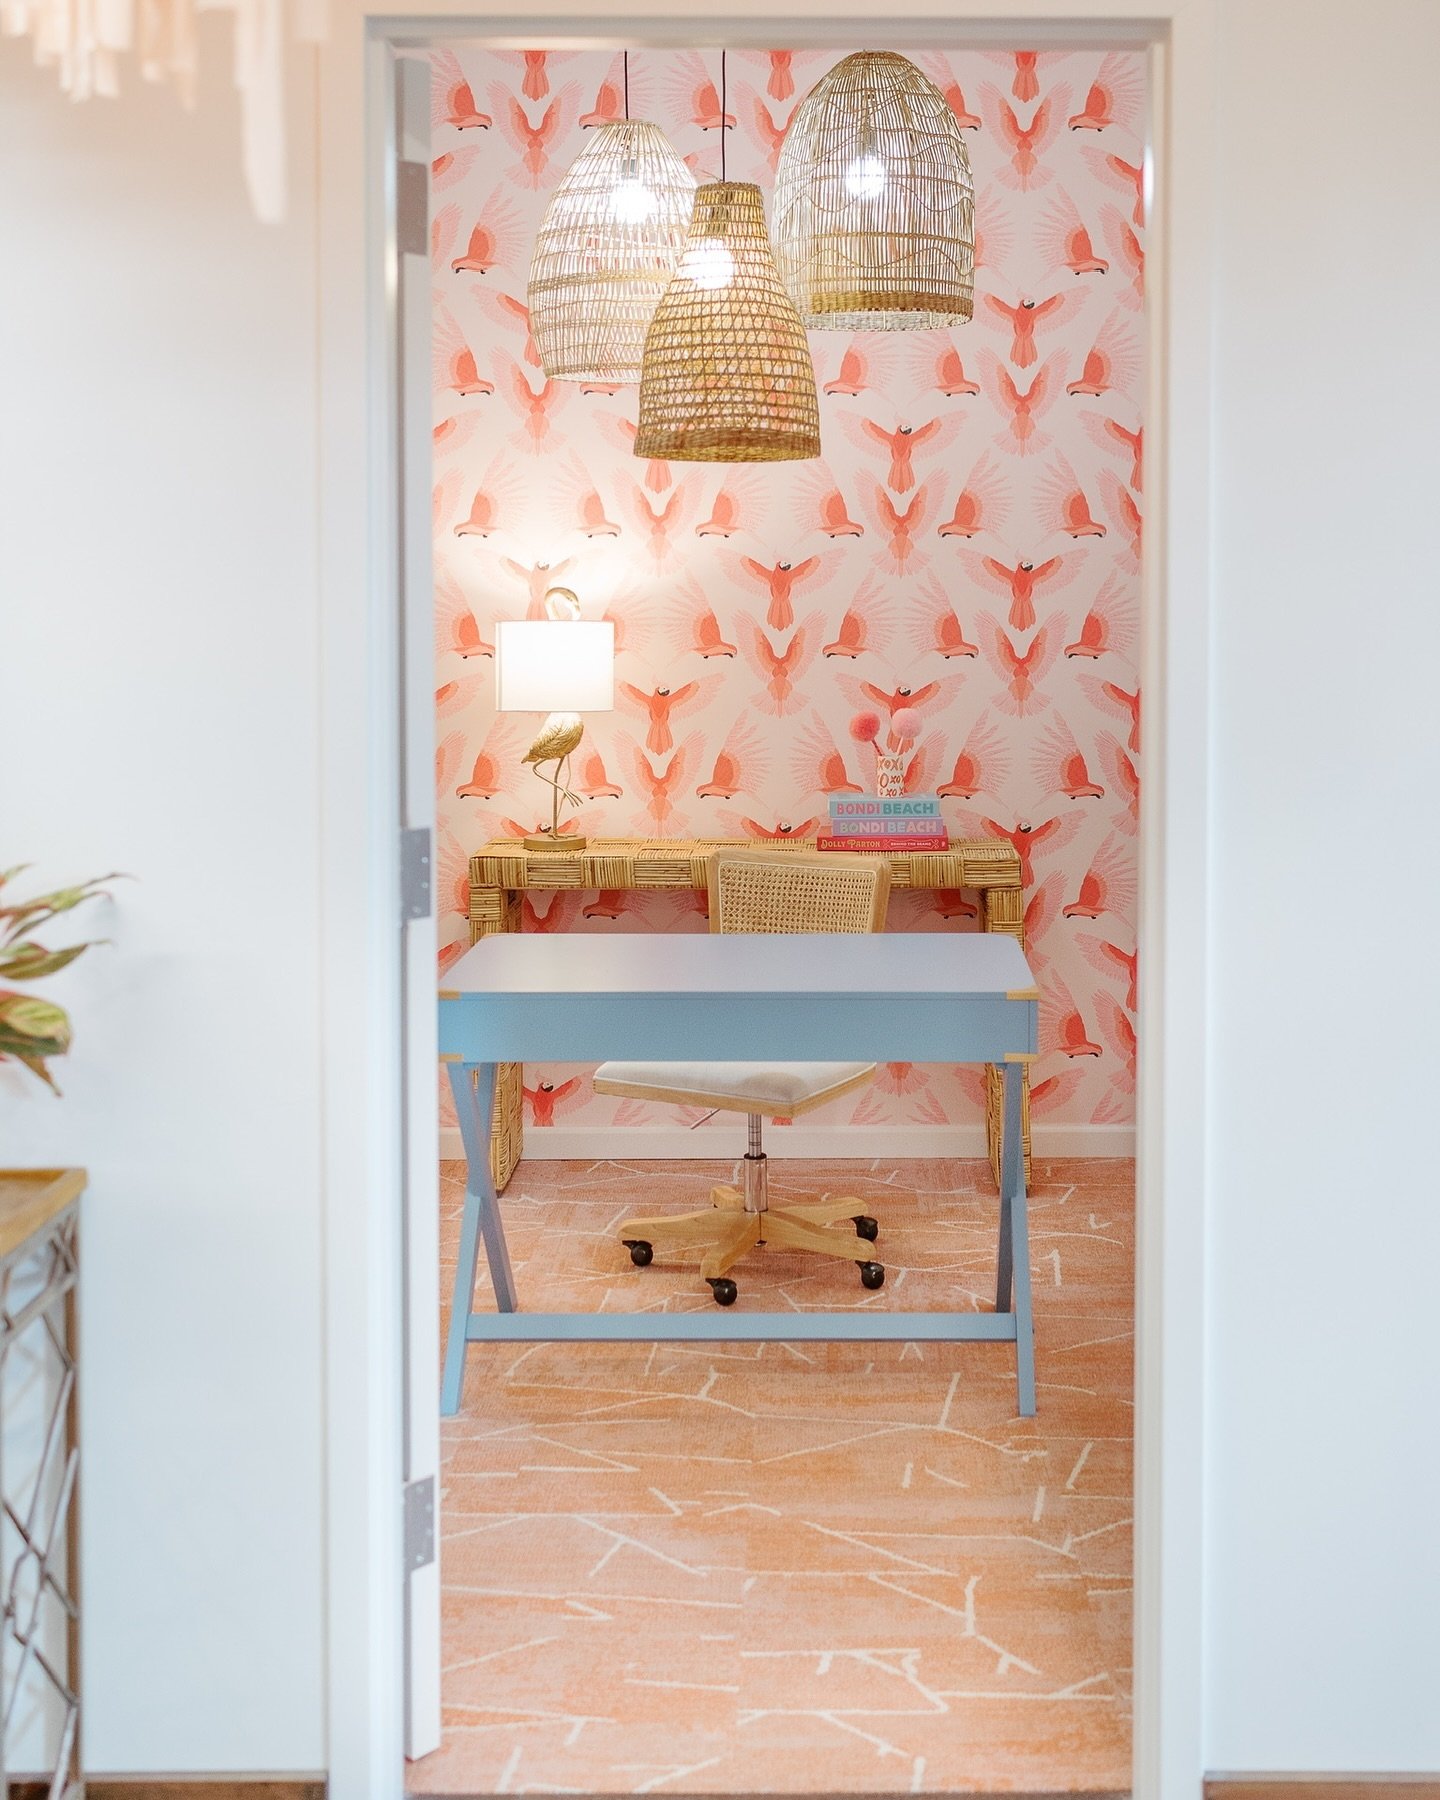 The pink 🦜 room is one of our favorite zoom rooms! Every time you&rsquo;re on a call, your fellow zoomers are always 🤩🤩🤩. 
.
.
womensupportingwomen #womeninbusiness #creativecoworking #coworking #selfierooms #entrepreneur #bosslady #smallbusiness